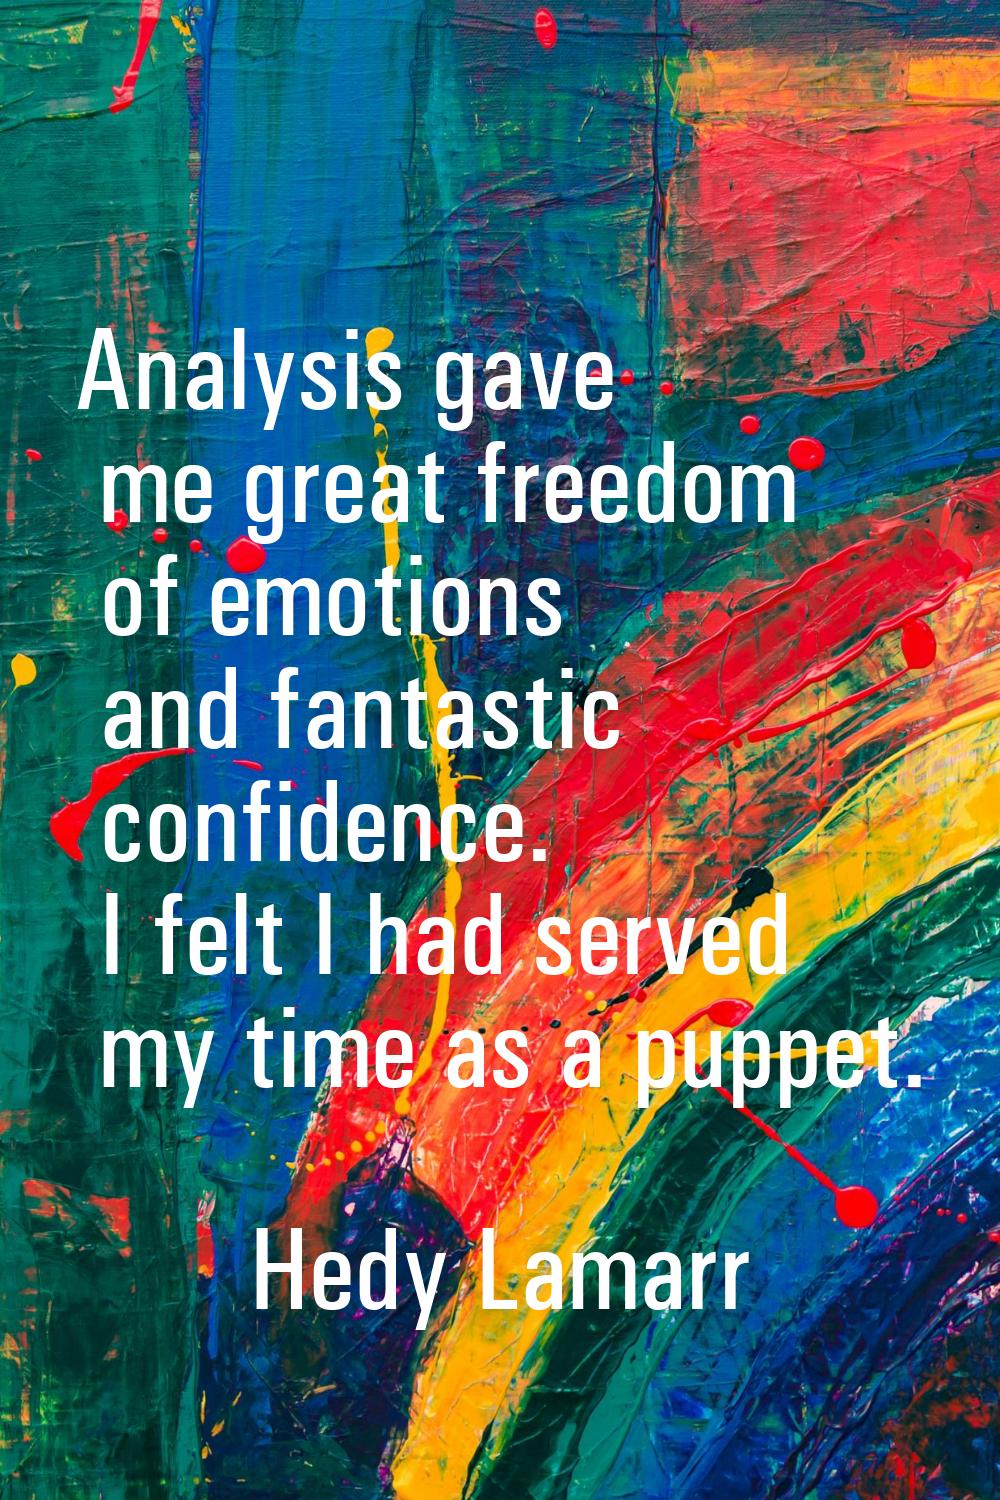 Analysis gave me great freedom of emotions and fantastic confidence. I felt I had served my time as